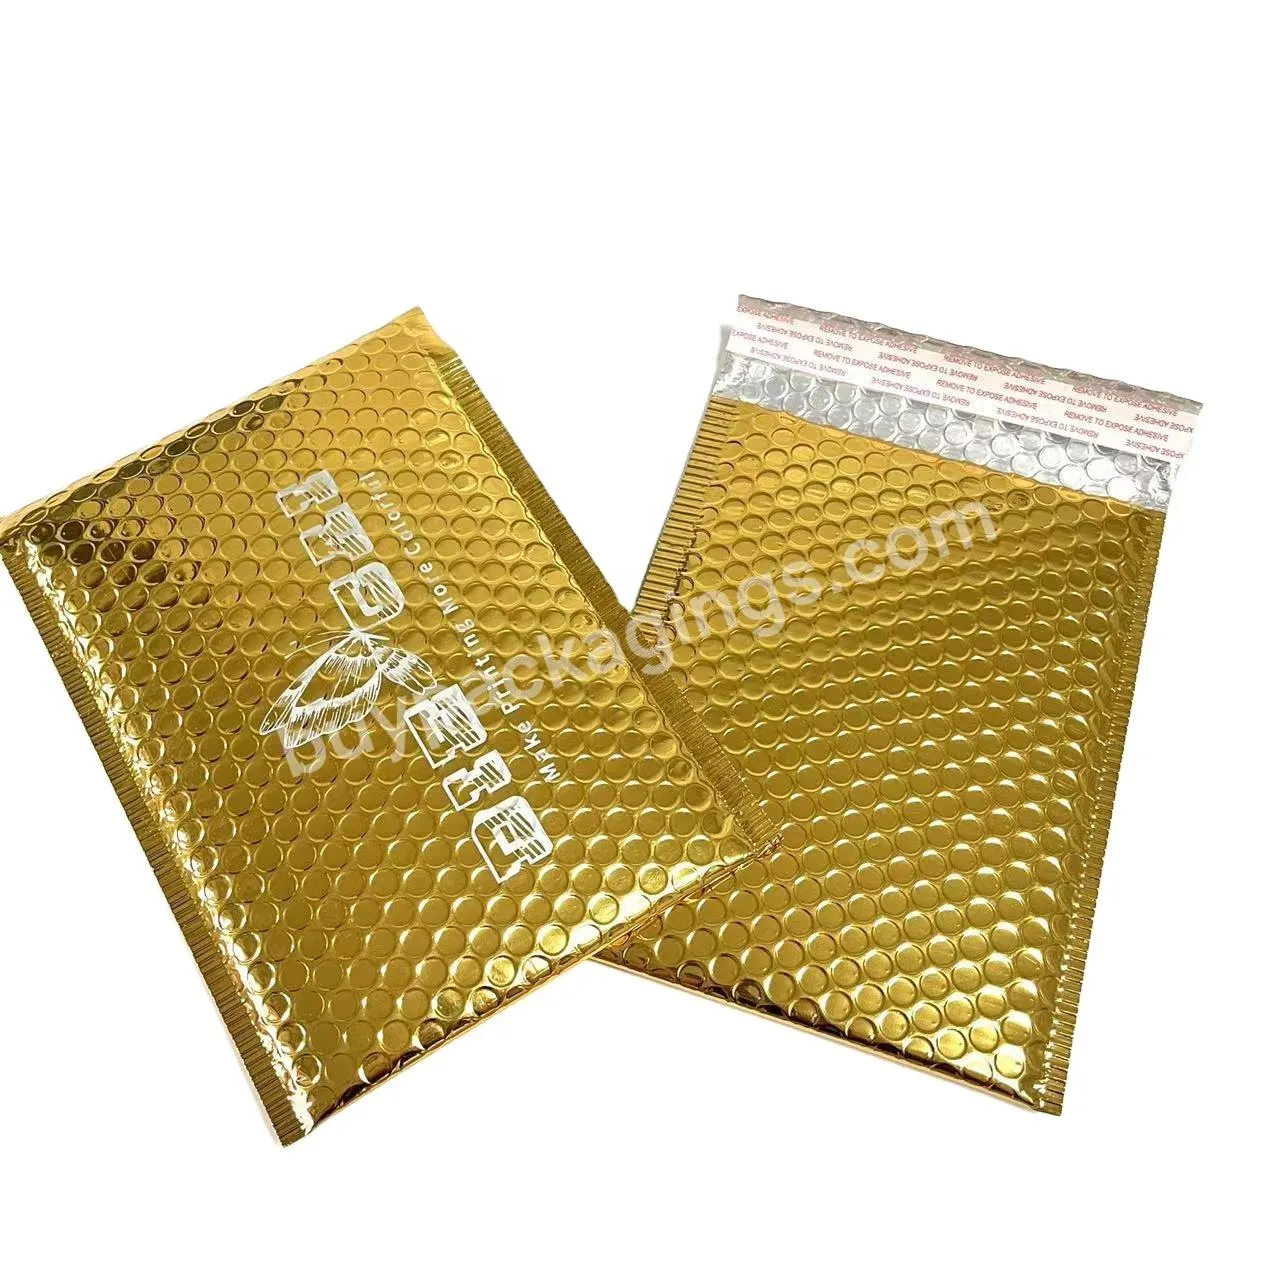 Hot Selling Bubble Mailers 6x10 Inch 25 Pack Waterproof Padded Envelopes Cushioning Self Seal Adhesive Padded Gold Bubble Mailer